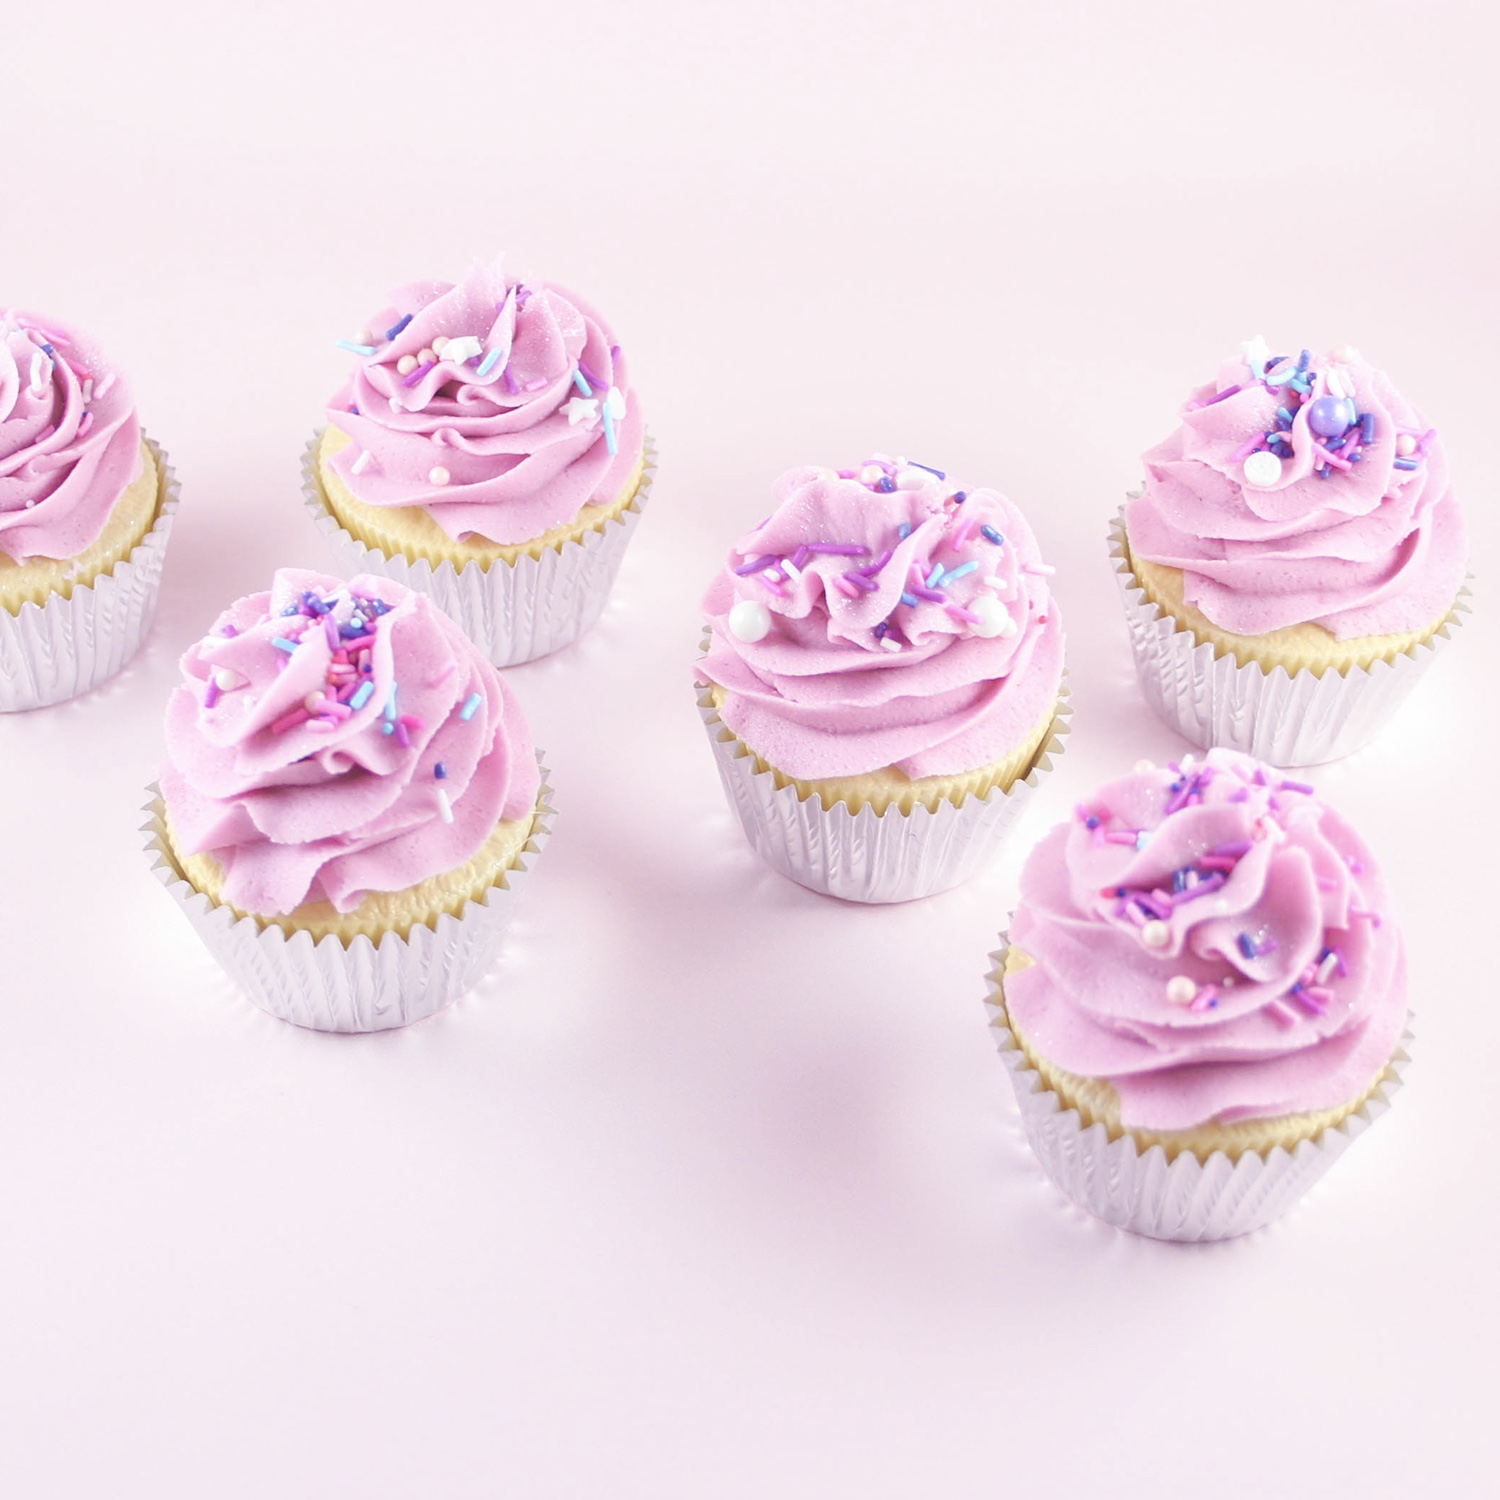 Cupcakes with a swirl of Raspberry Ripple Buttercream, sprinkles and jewel dust for sparkle.